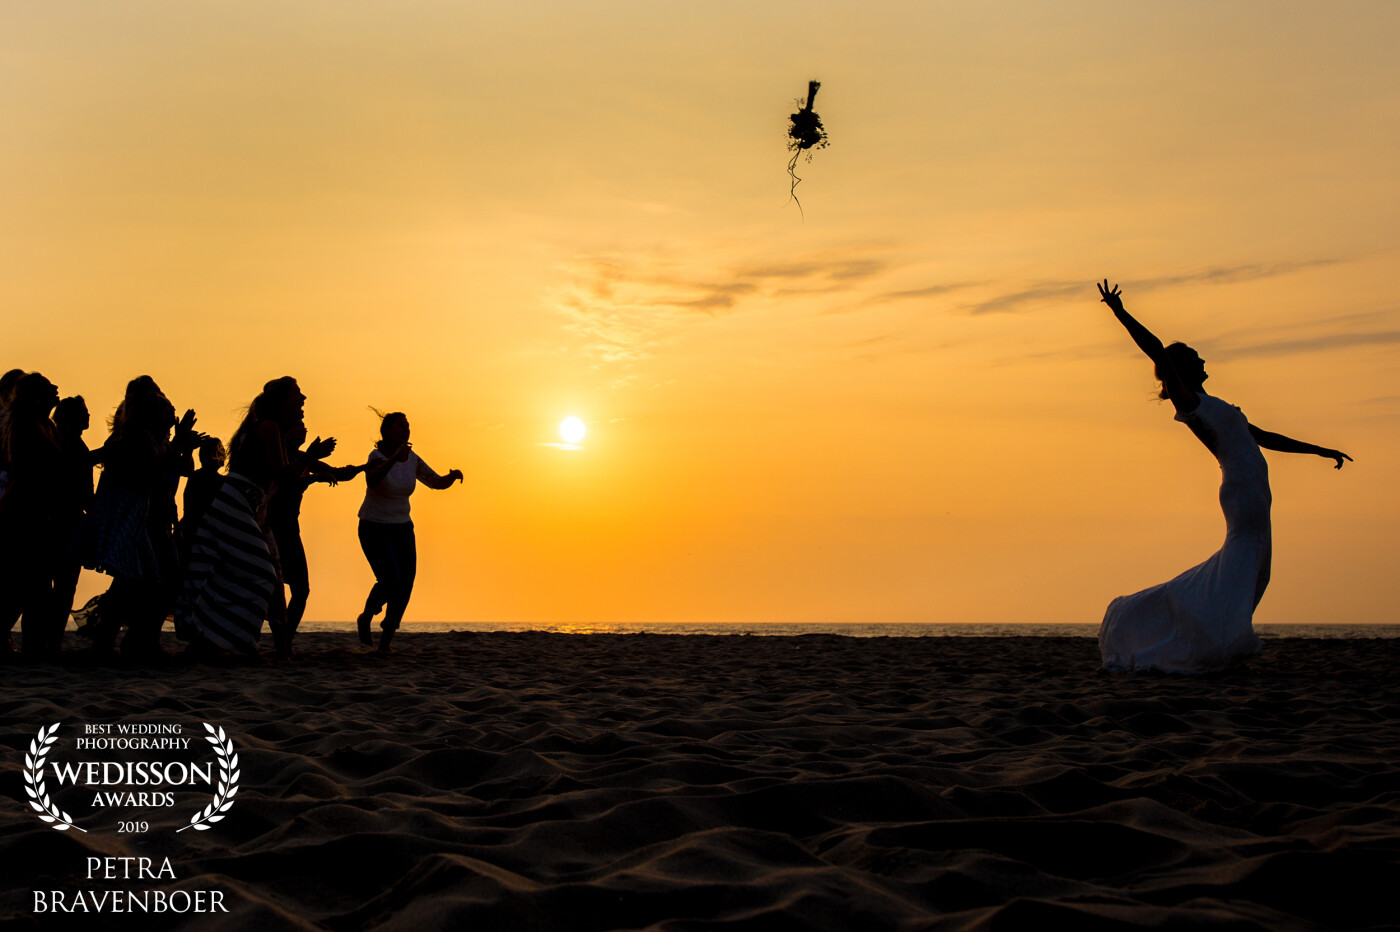 At the end of this june-wedding the bride and her friends went to the beach to throw the bouquet at sunset. <br />
A real beach wedding ♥ <br />
